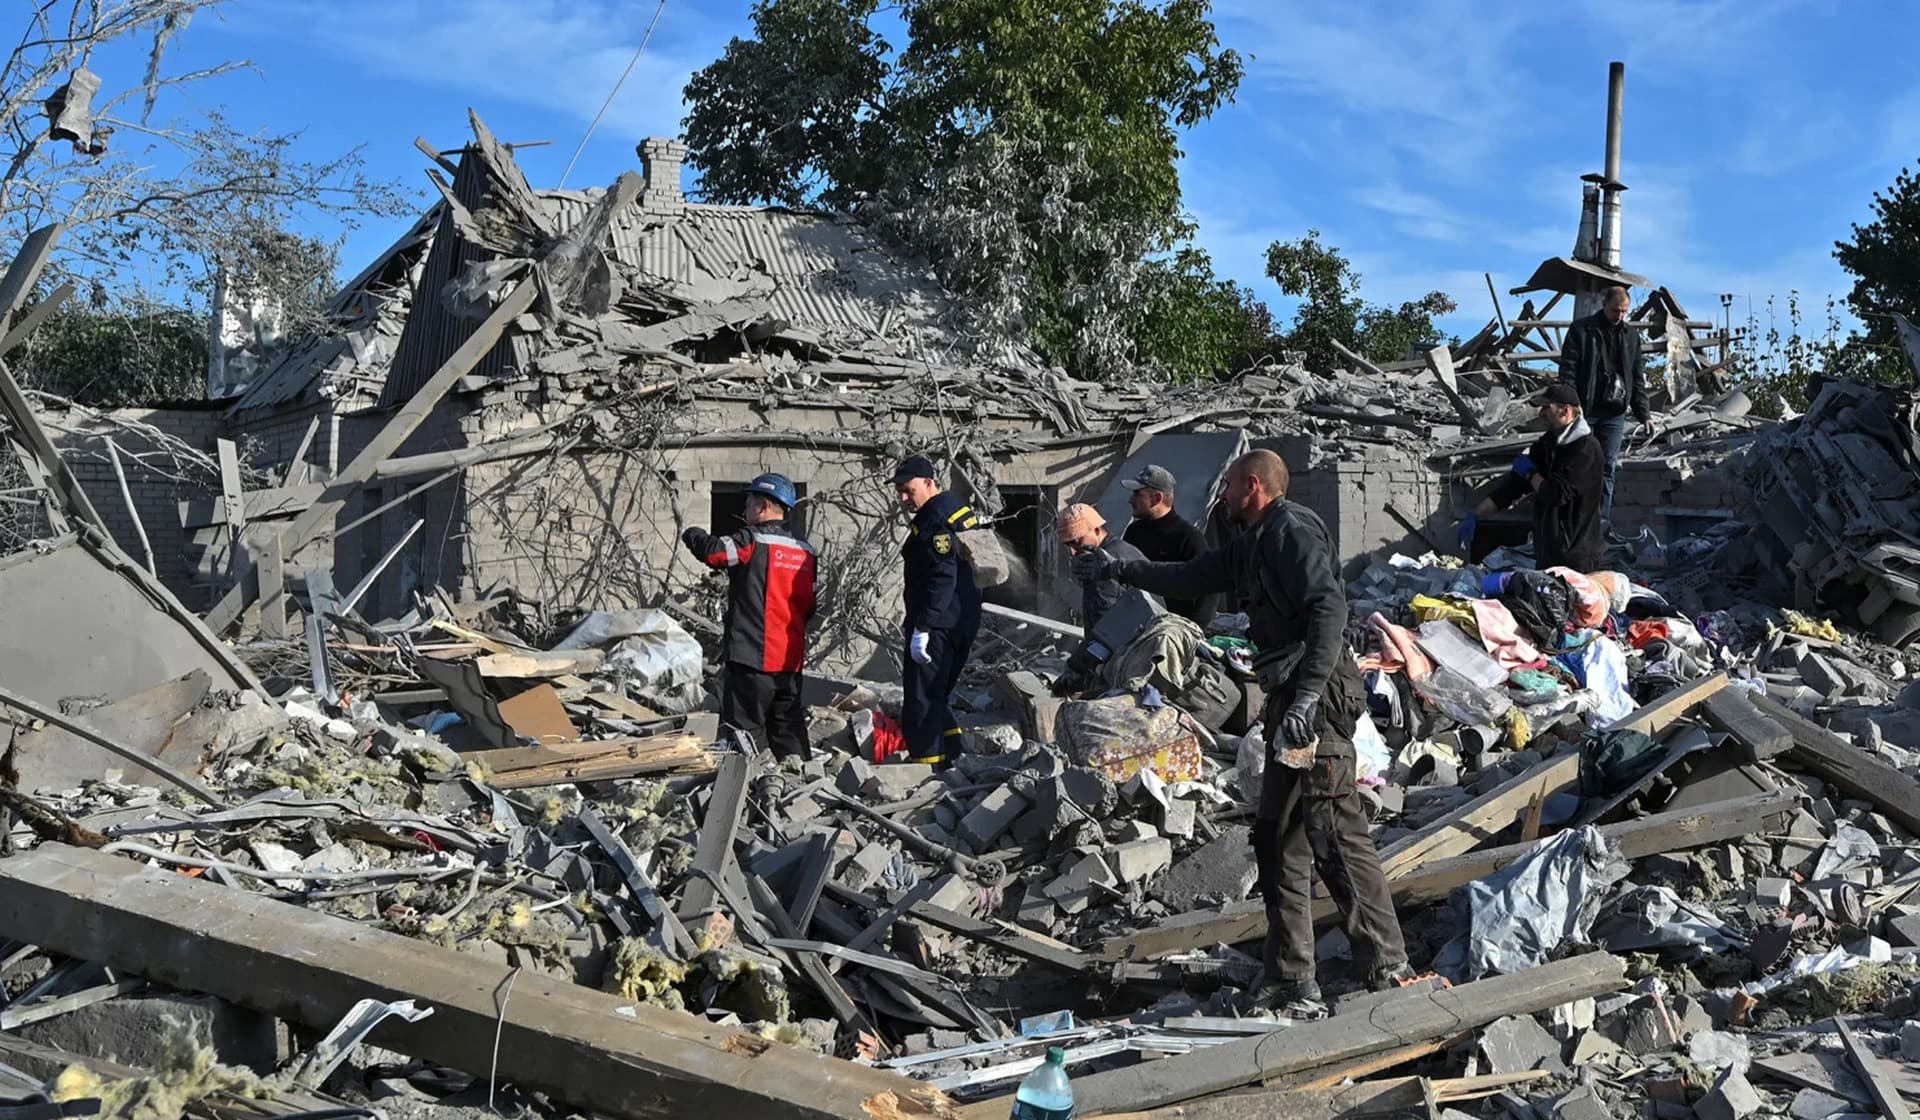 Rescuers and local residents remove debris at a site of a residential area heavily damaged by a Russian missile strike in Zaporizhzhia